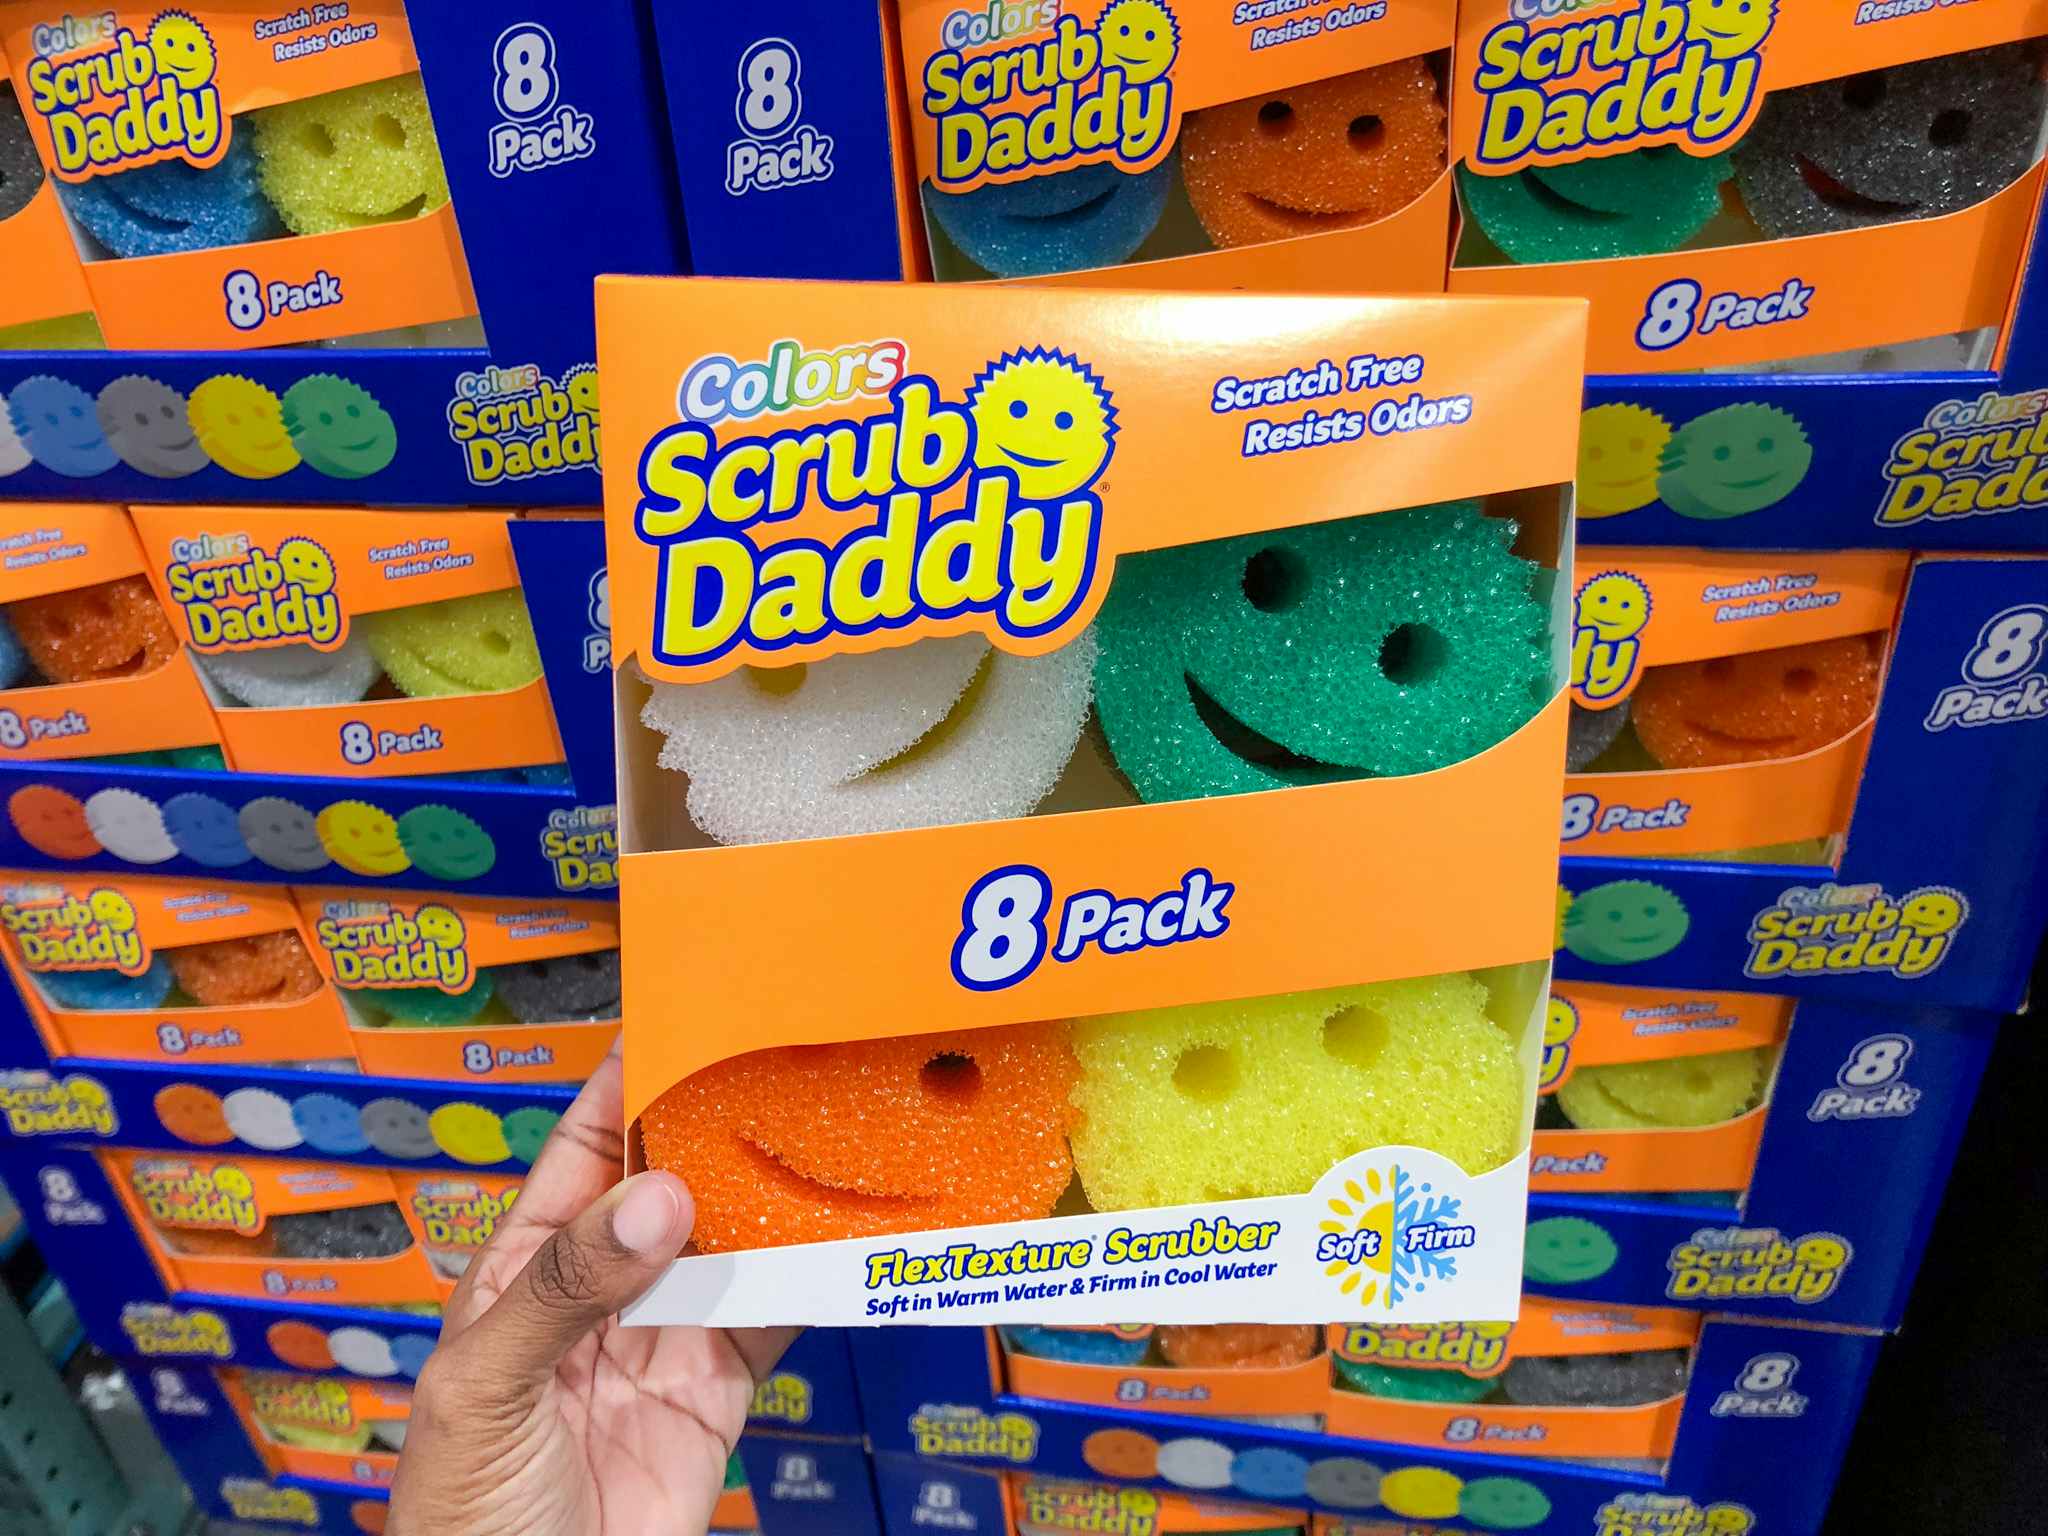 person holding an 8-pack of scrub daddy sponges in front of a display